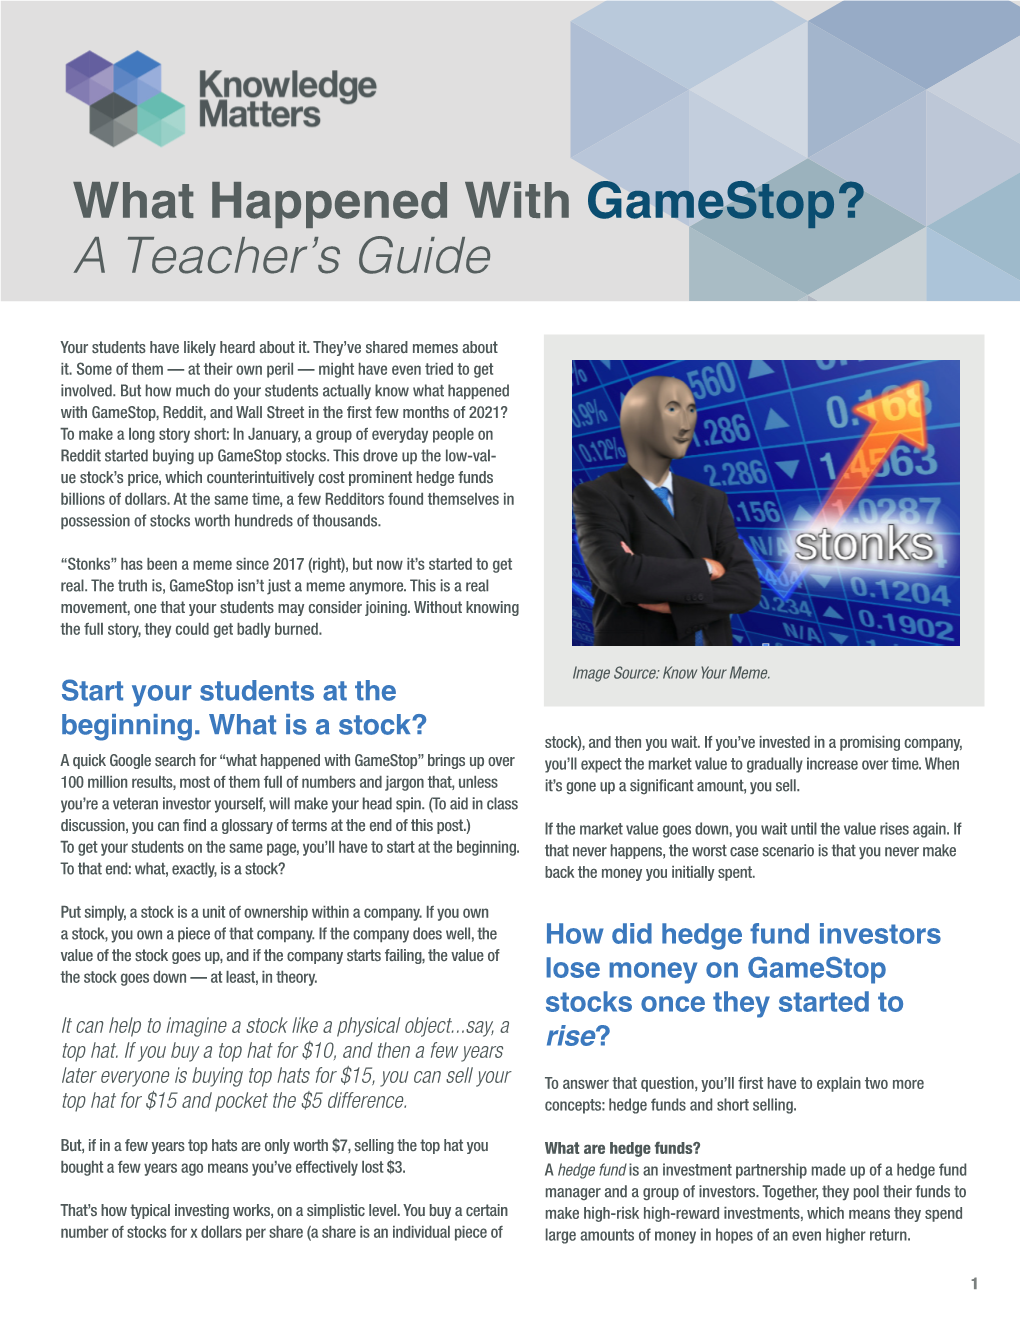 What Happened with Gamestop? a Teacher’S Guide